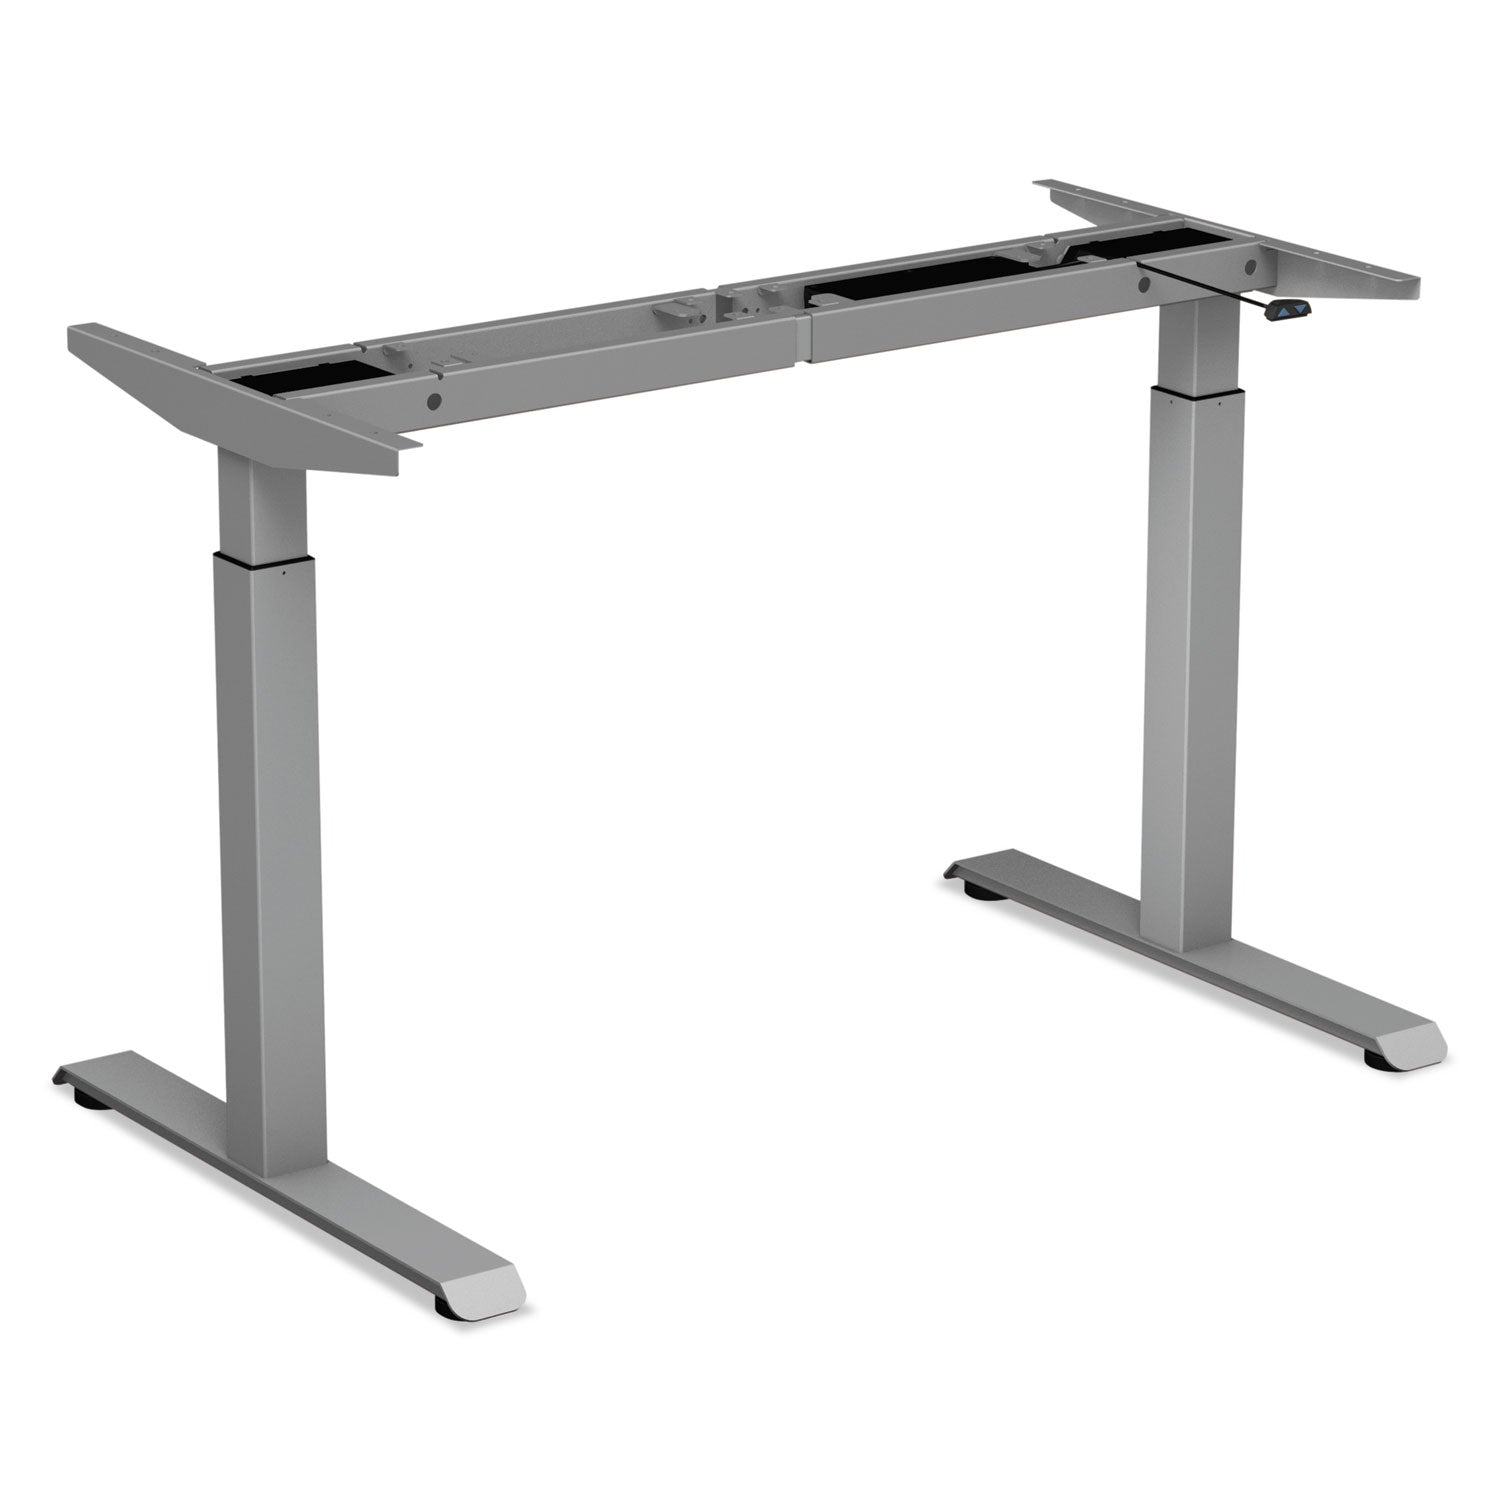 adaptivergo-sit-stand-two-stage-electric-height-adjustable-table-base-4806-x-2435-x-275-to-472-gray_aleht2ssg - 1